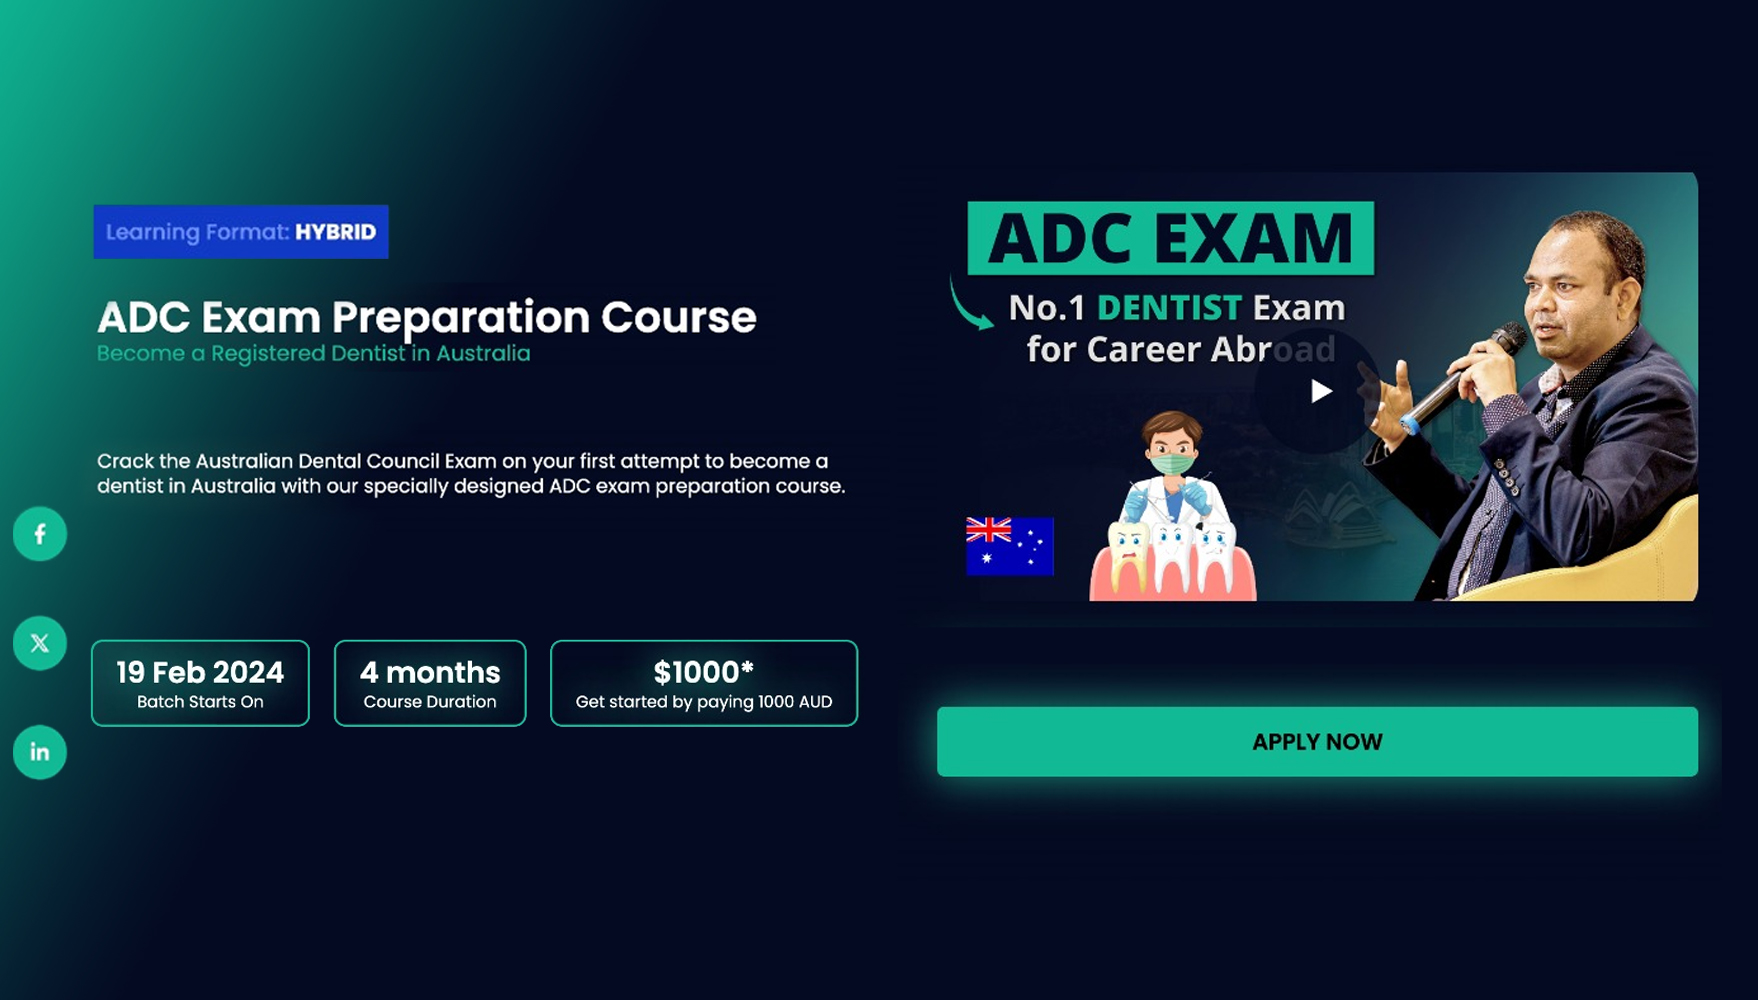 ADC preparation course by Academically.